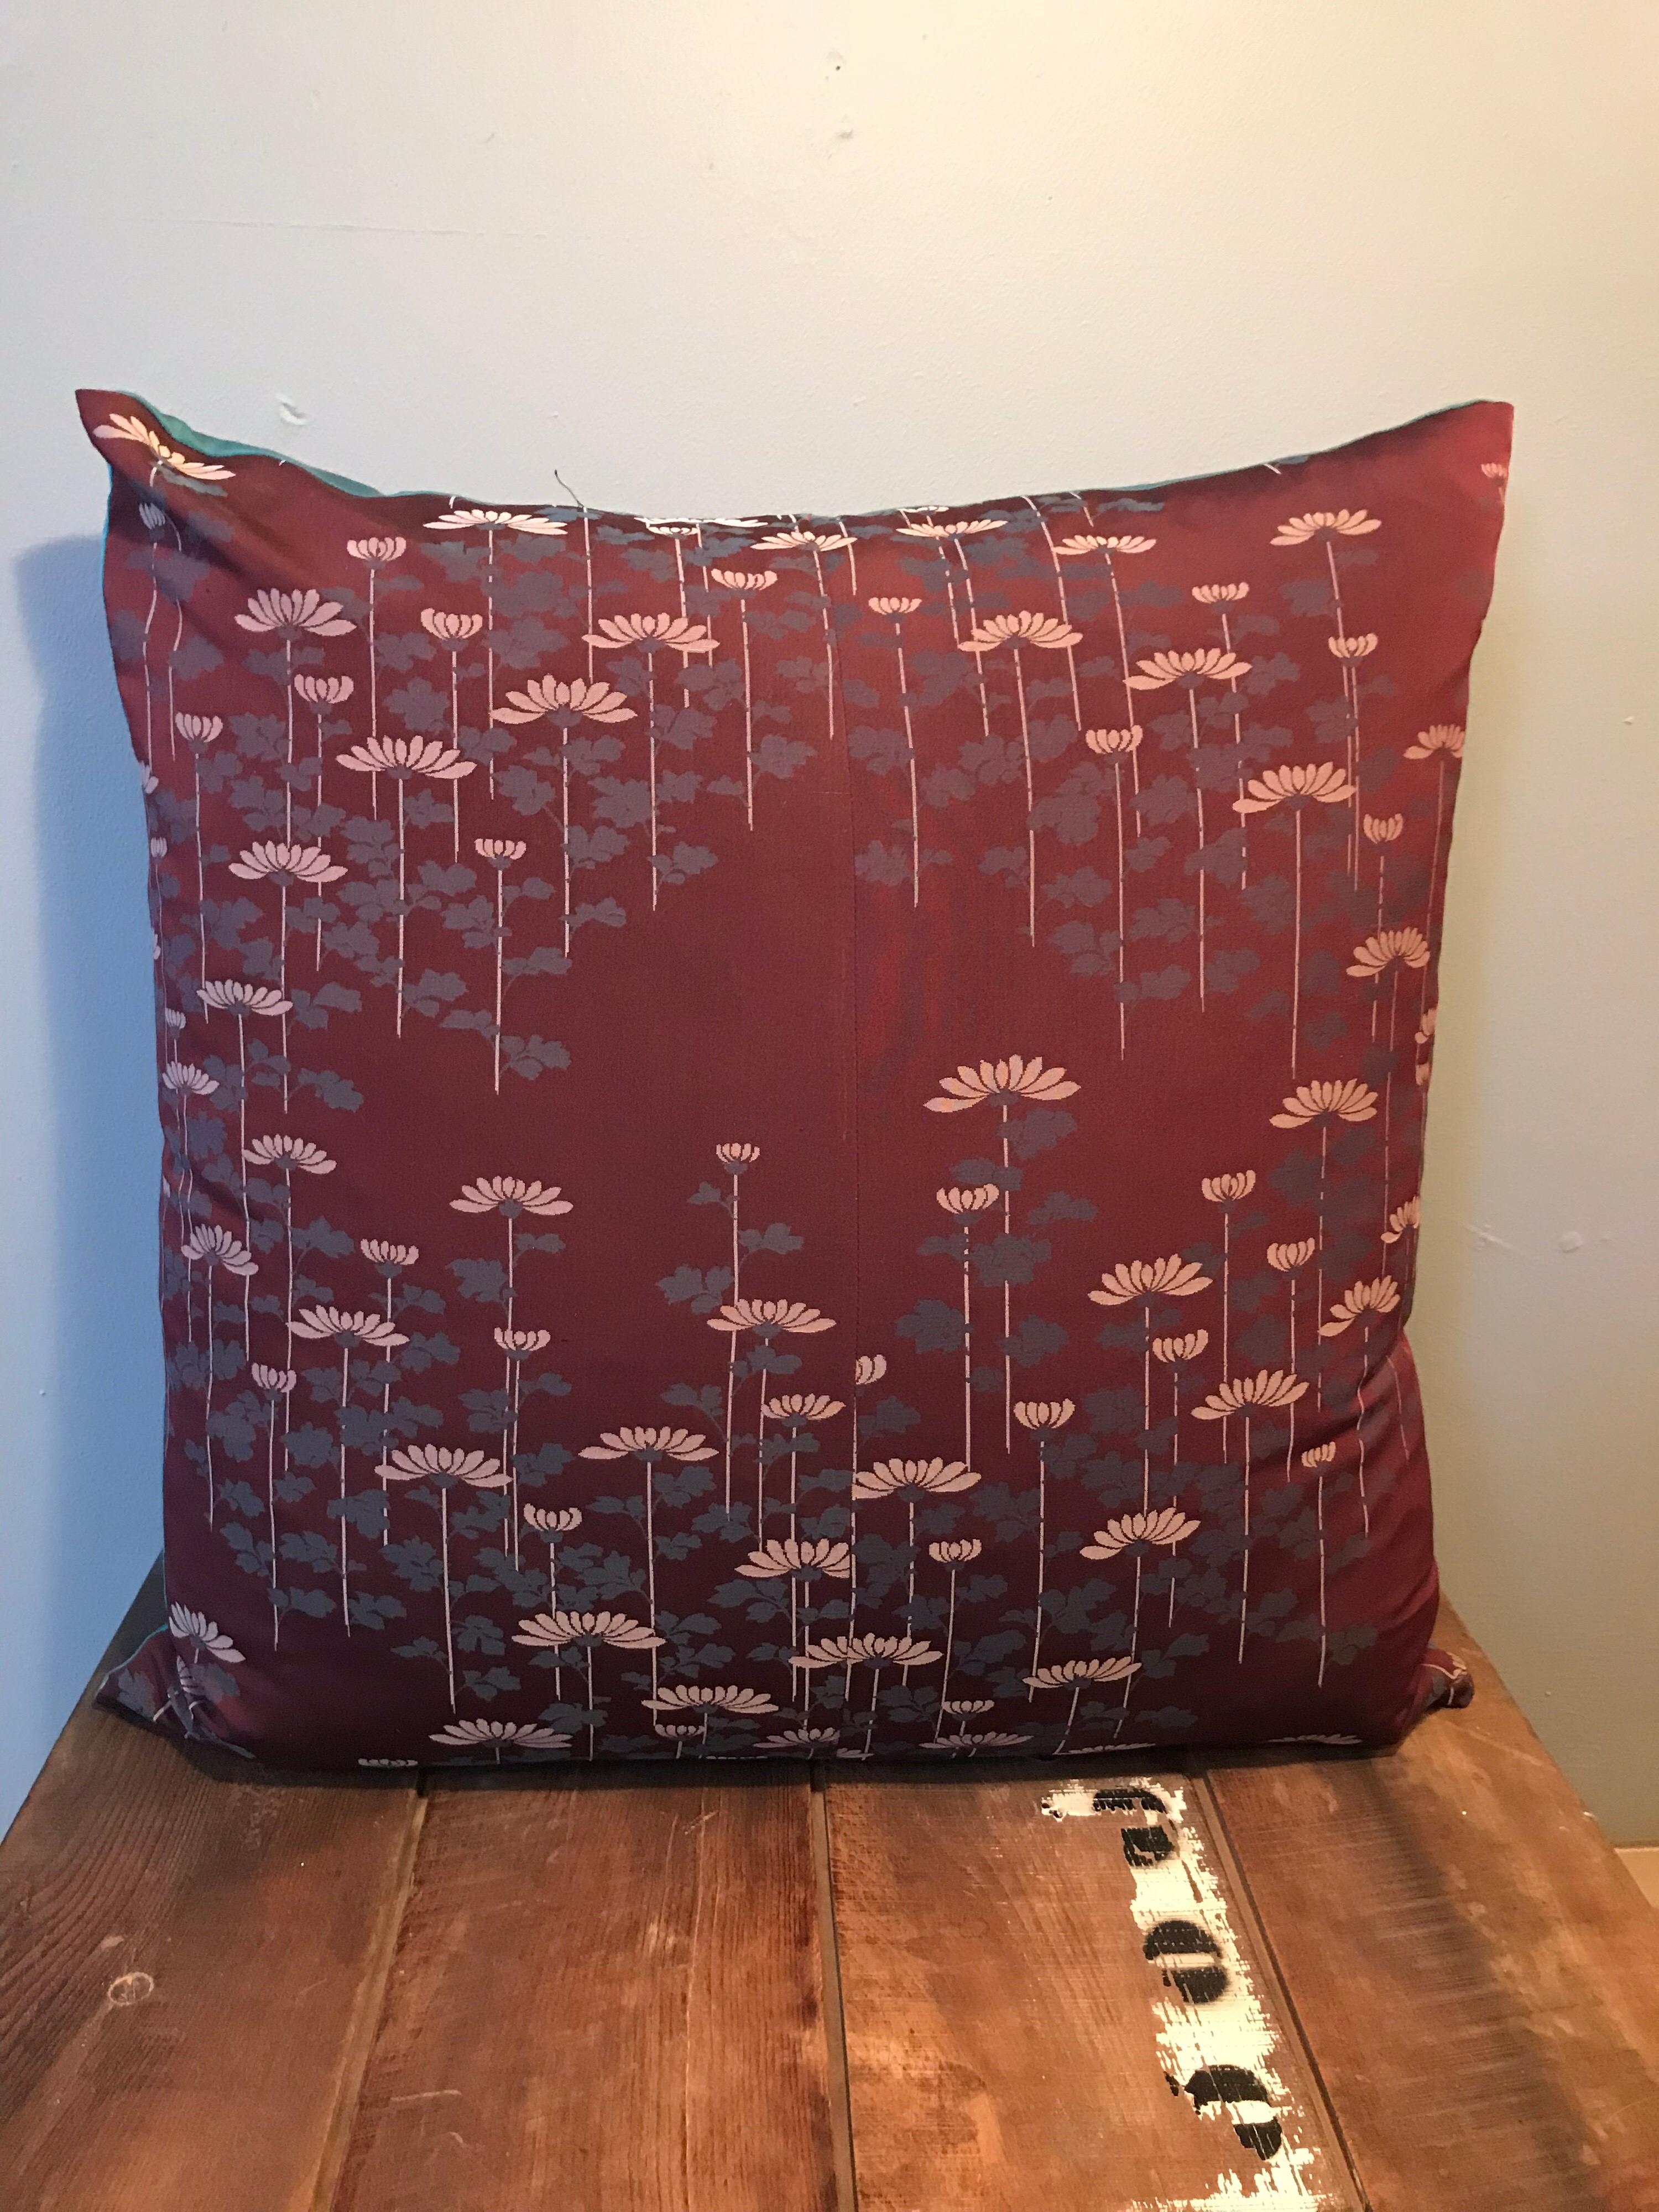 Beautiful and unique set of vintage silk cushions made from a Japanese Kimono.
Each set is unique and made from hand picked kimonos.
This set has lovely embroidered floral patterns and with feather filling.
Measurements are one cushion 50 x 50cm